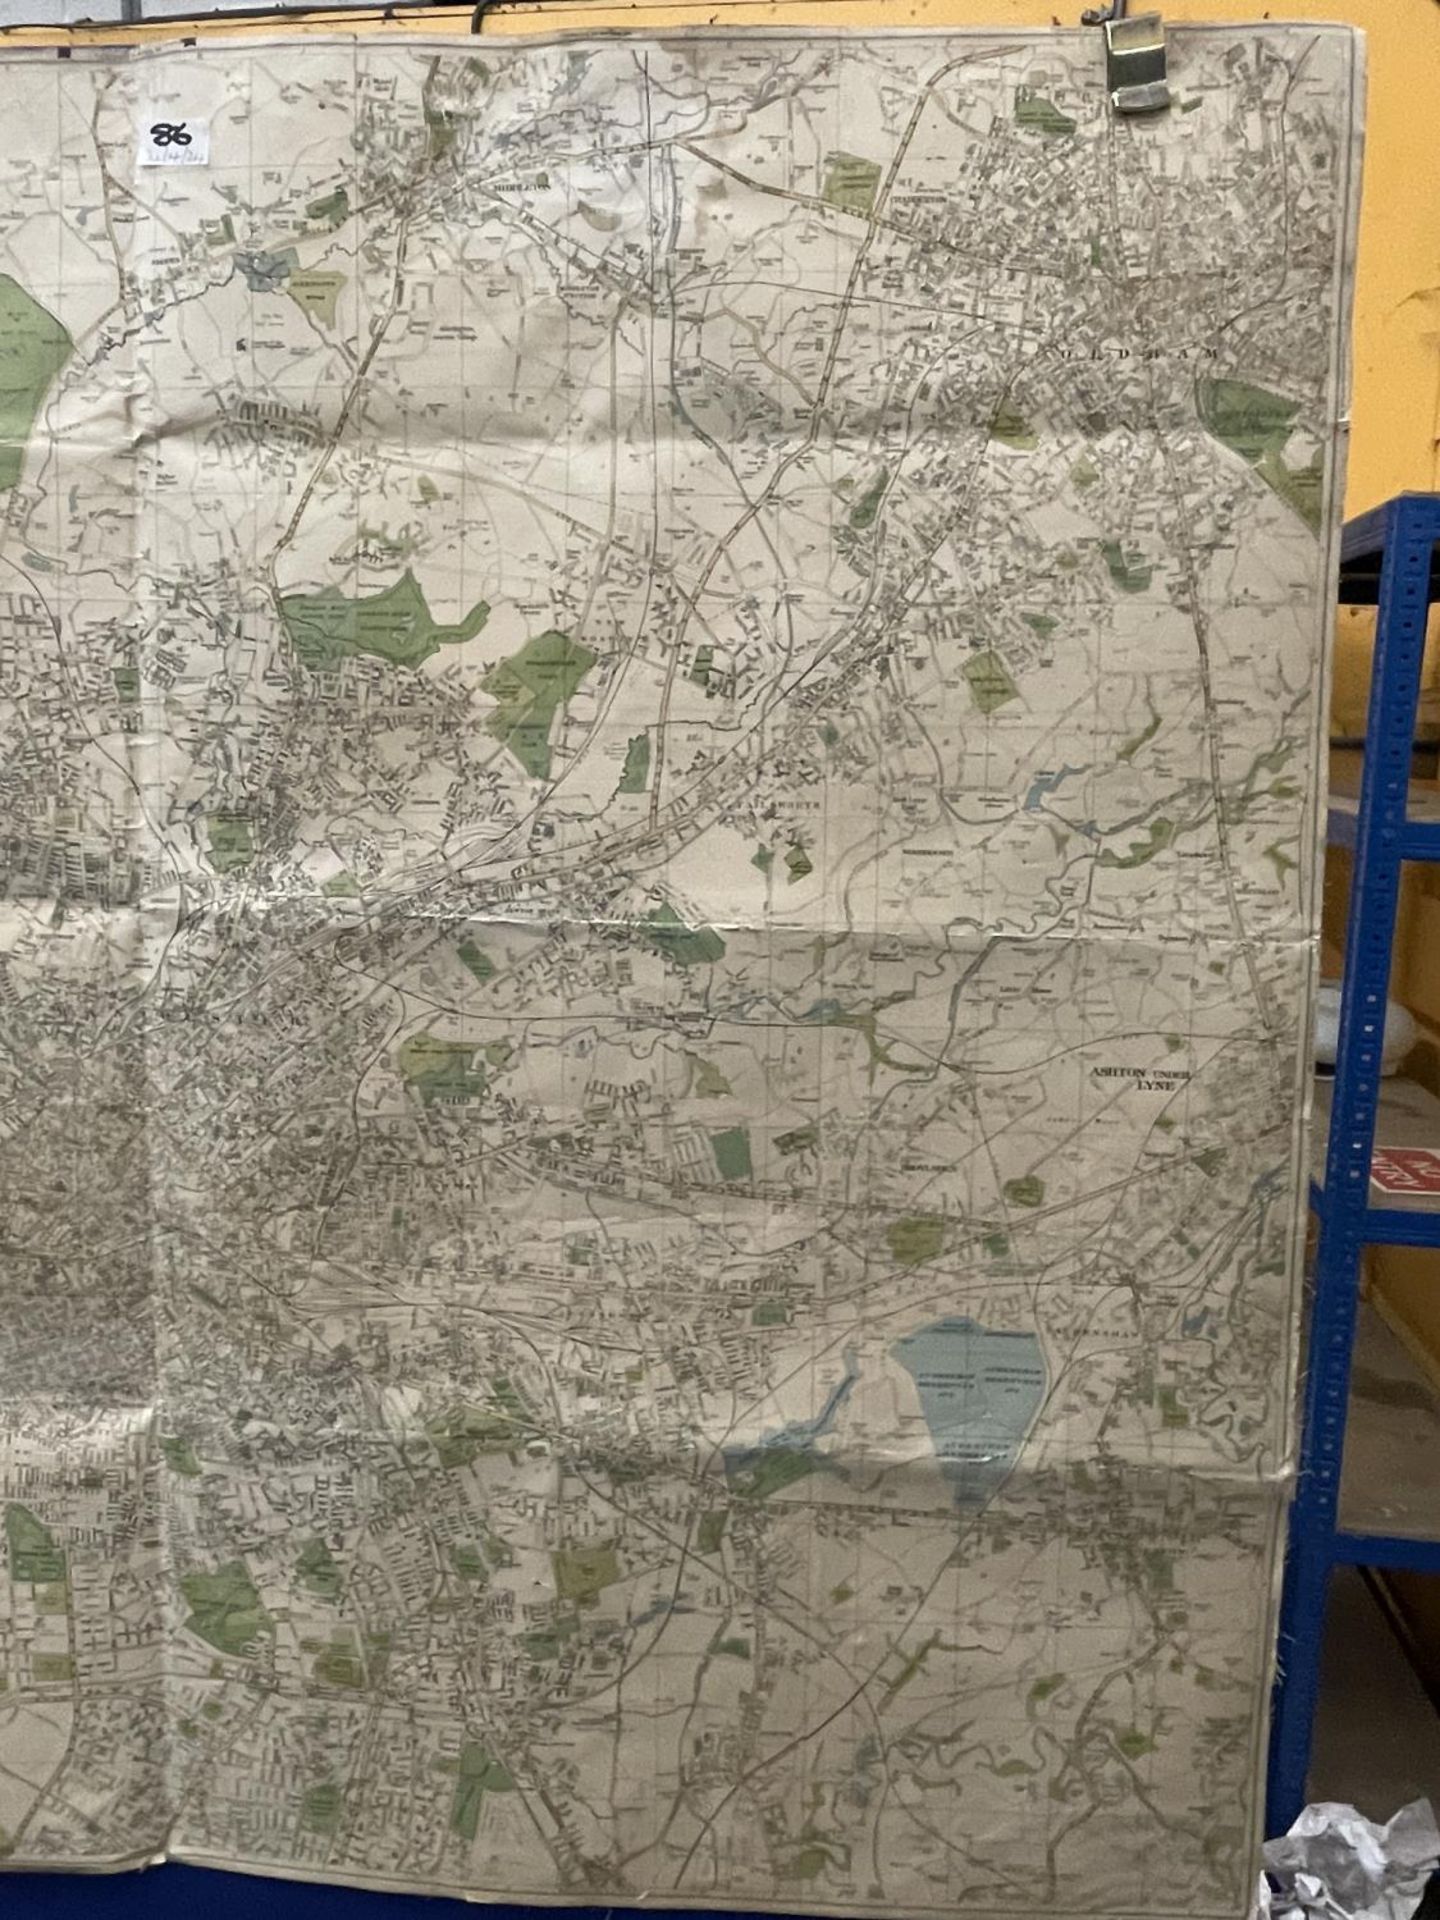 A LARGE VINTAGE MAP OF MANCHESTER AND THE SURROUNDING AREA - Image 2 of 4